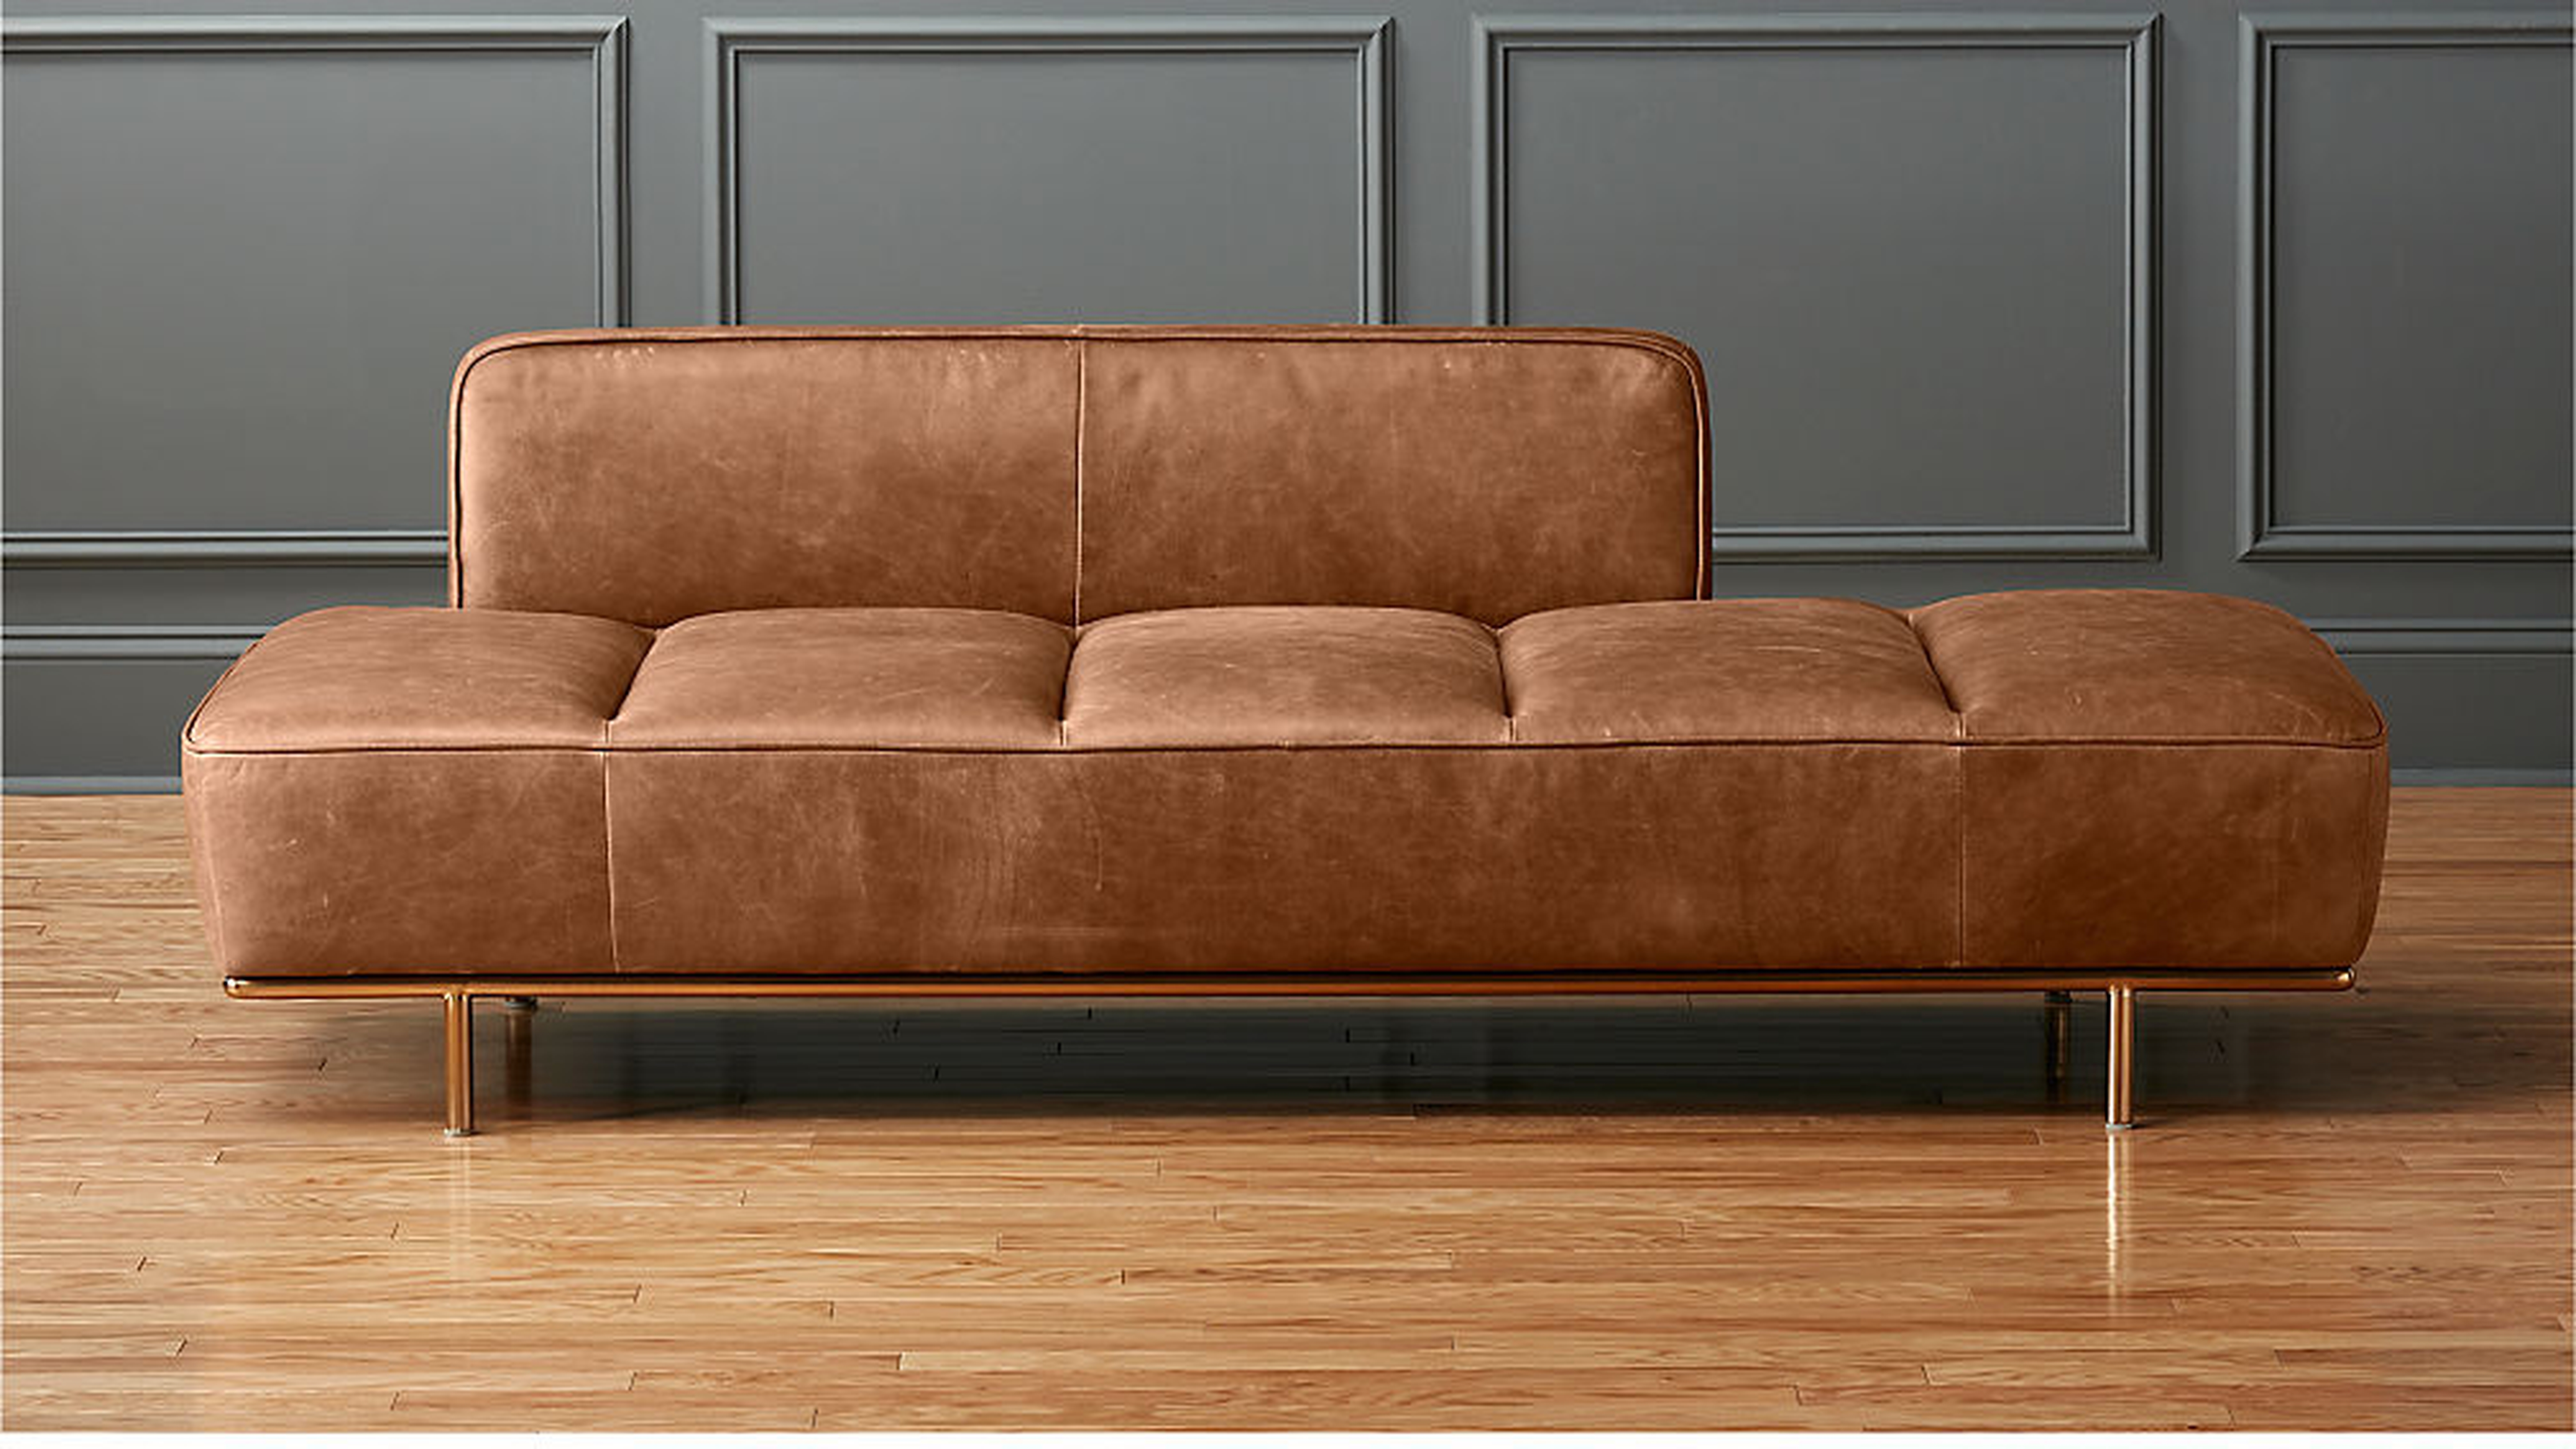 LAWNDALE SADDLE LEATHER DAYBED WITH BRASS BASE - CB2